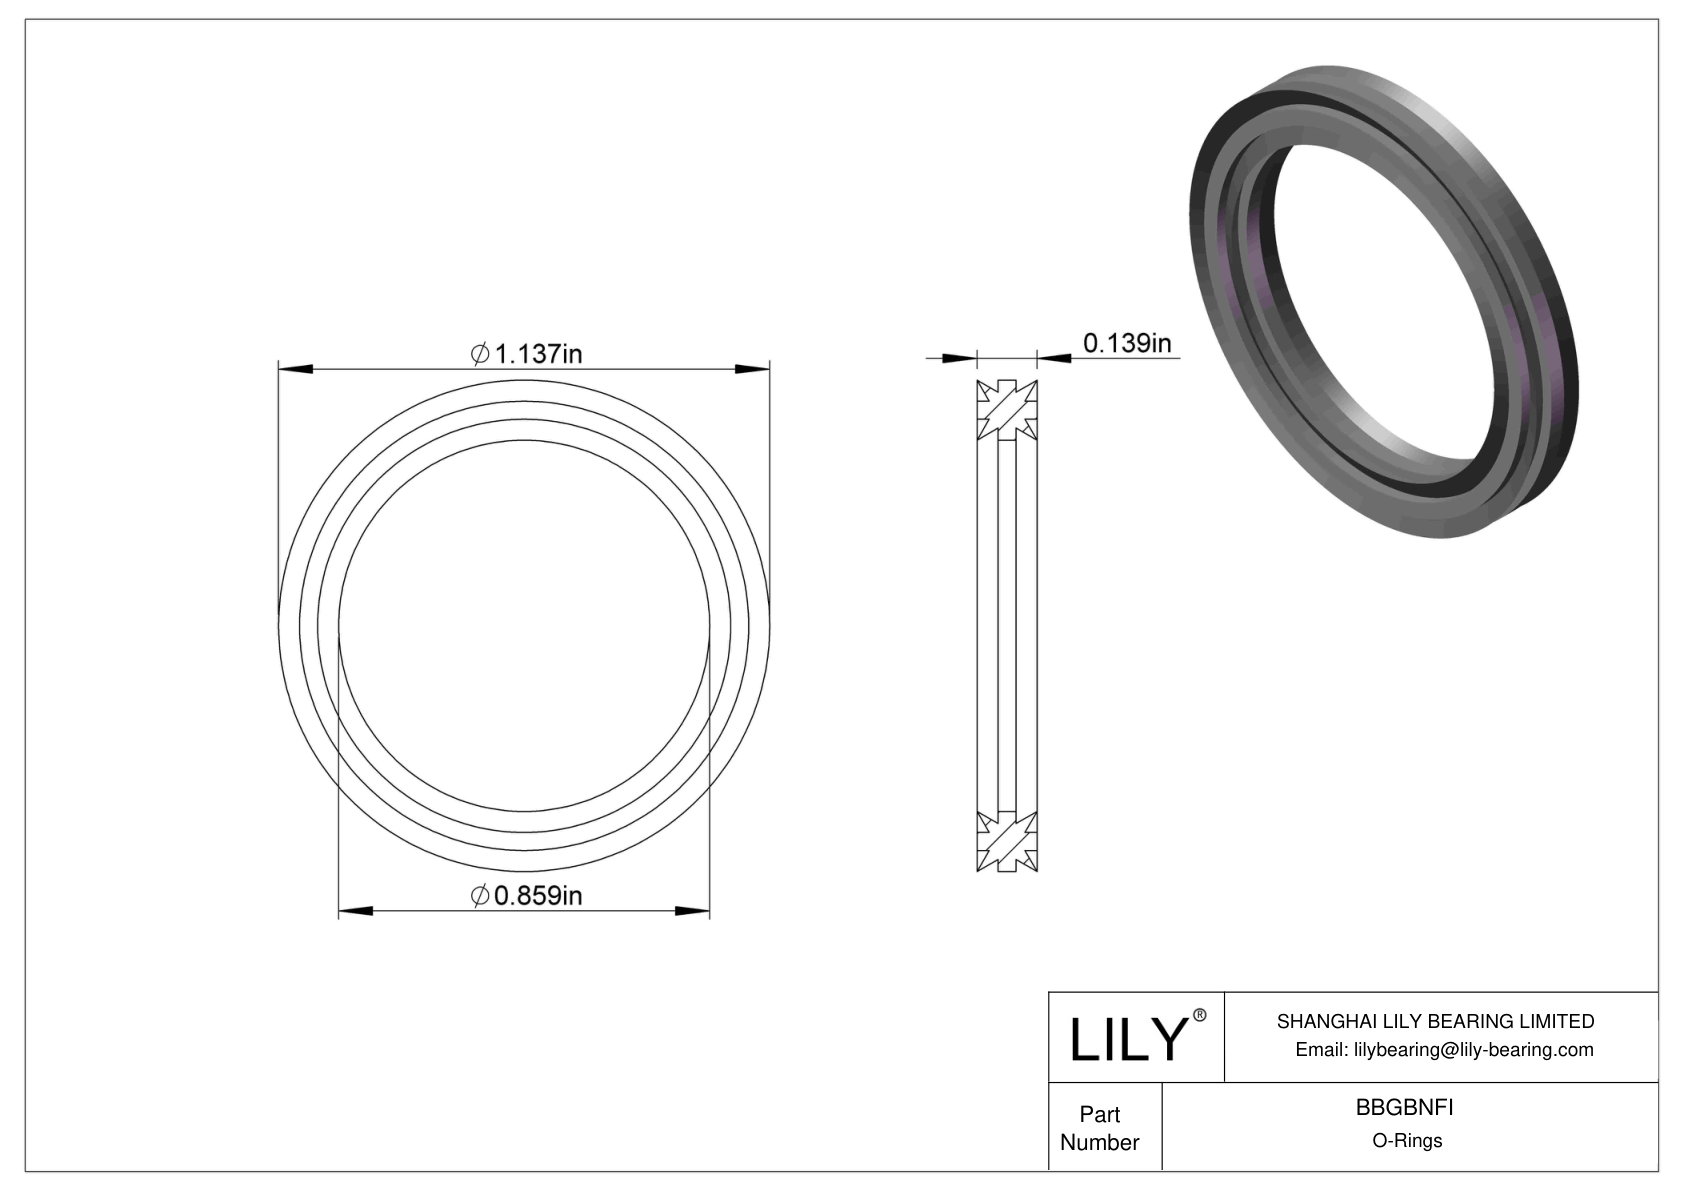 BBGBNFI Oil Resistant O-Rings Double X cad drawing